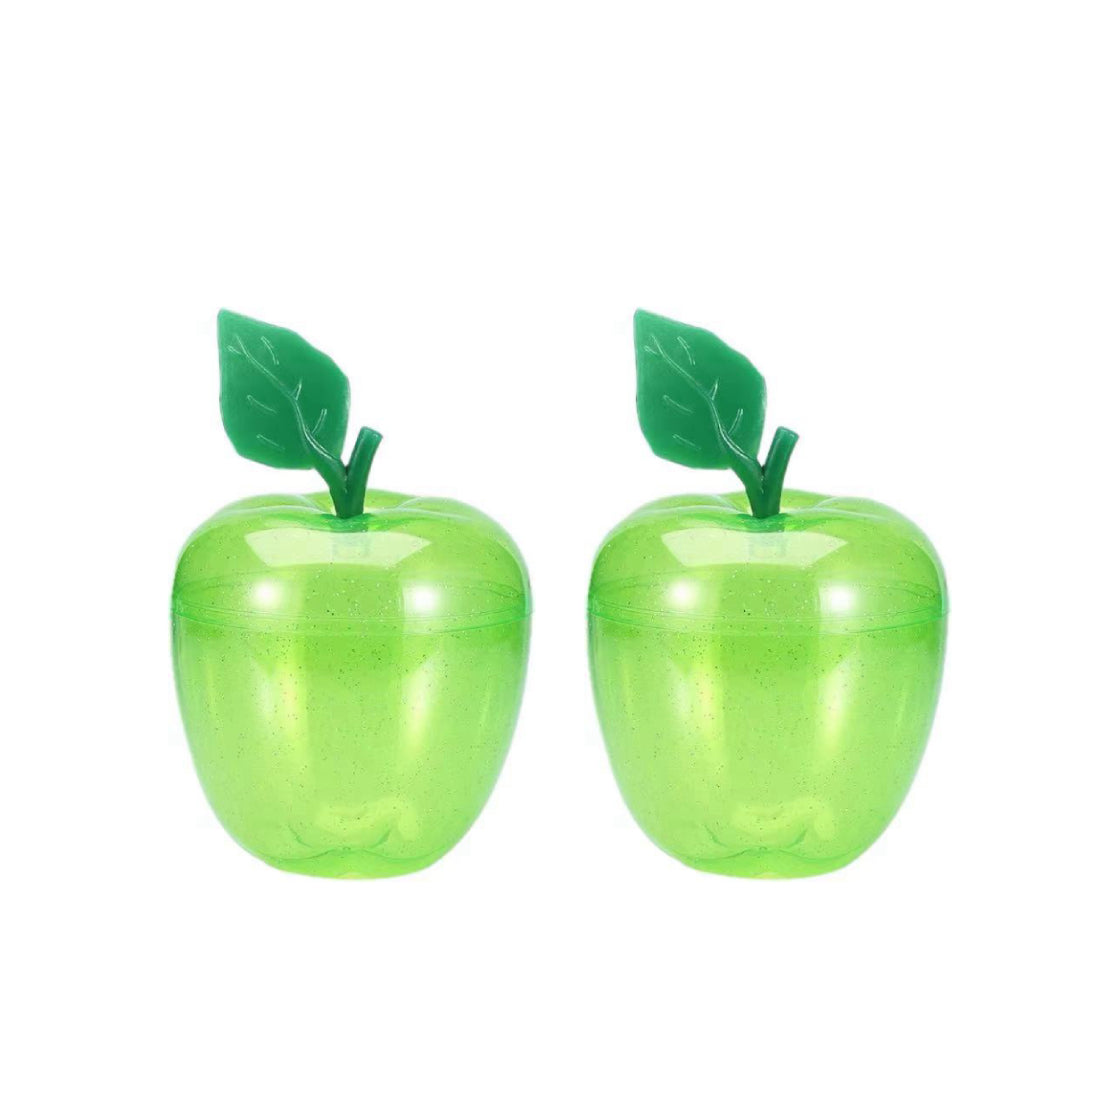 Plastic Solid Color Apple Candy Gift Box, 2-Pack, Christmas Eve Halloween Candy Jar Packaging Box, Holiday Surprise Gift Home Decor Ornament